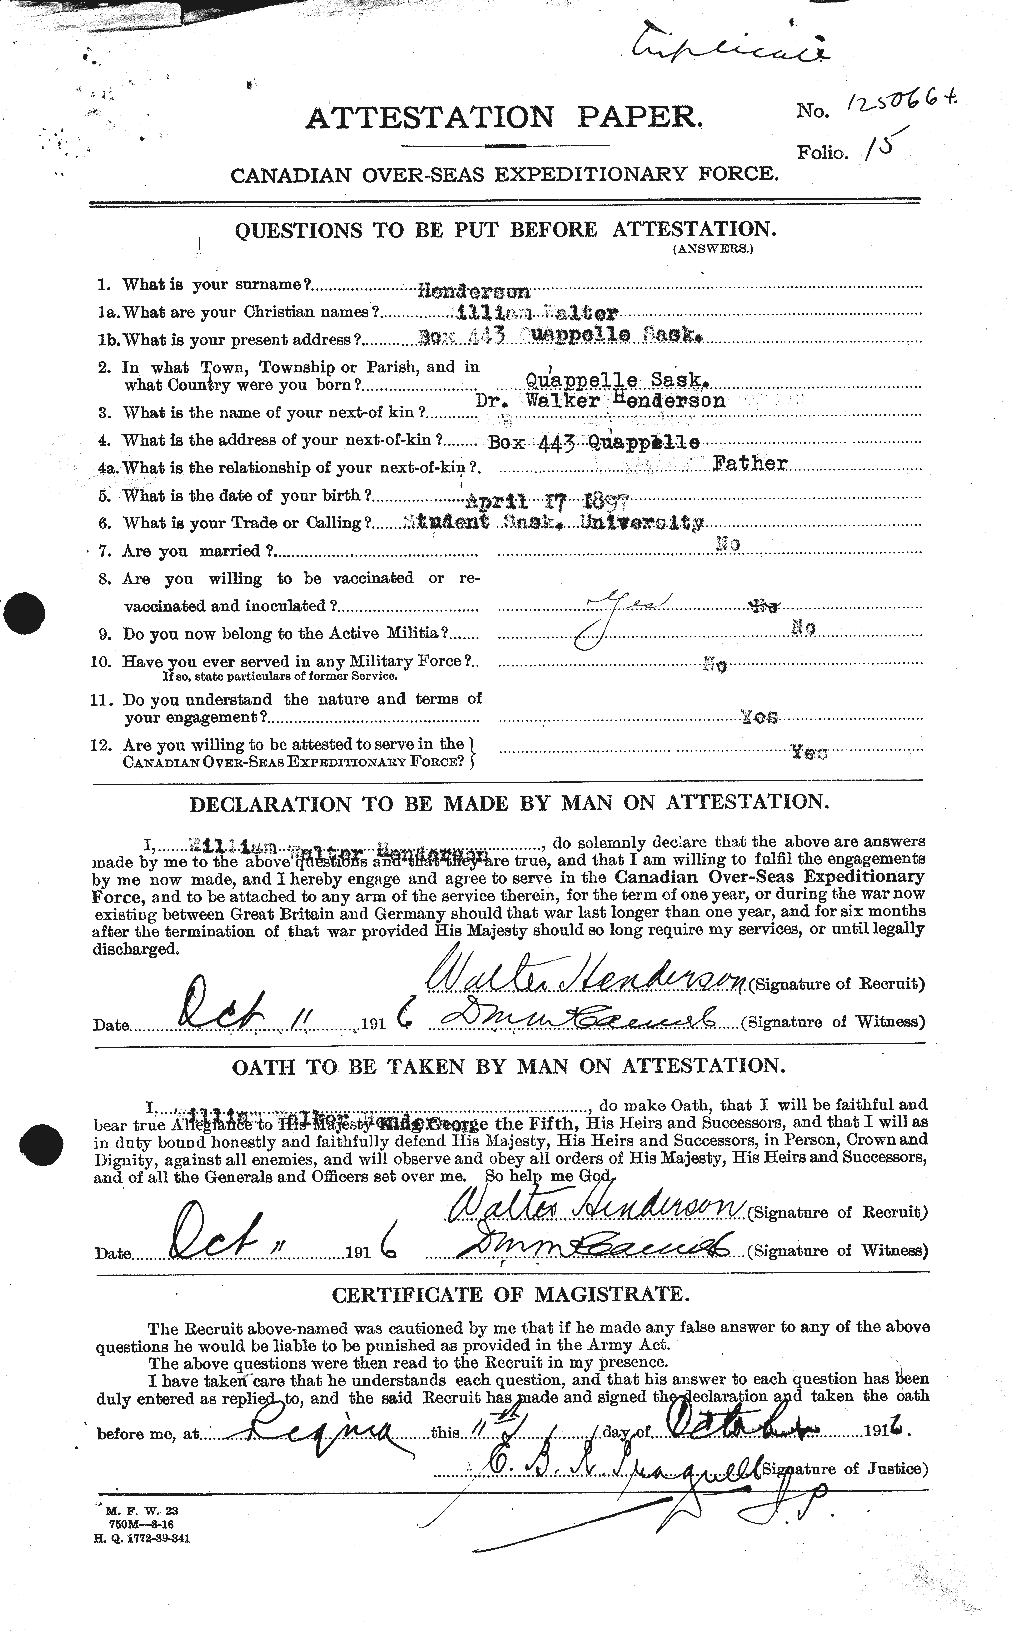 Personnel Records of the First World War - CEF 389080a